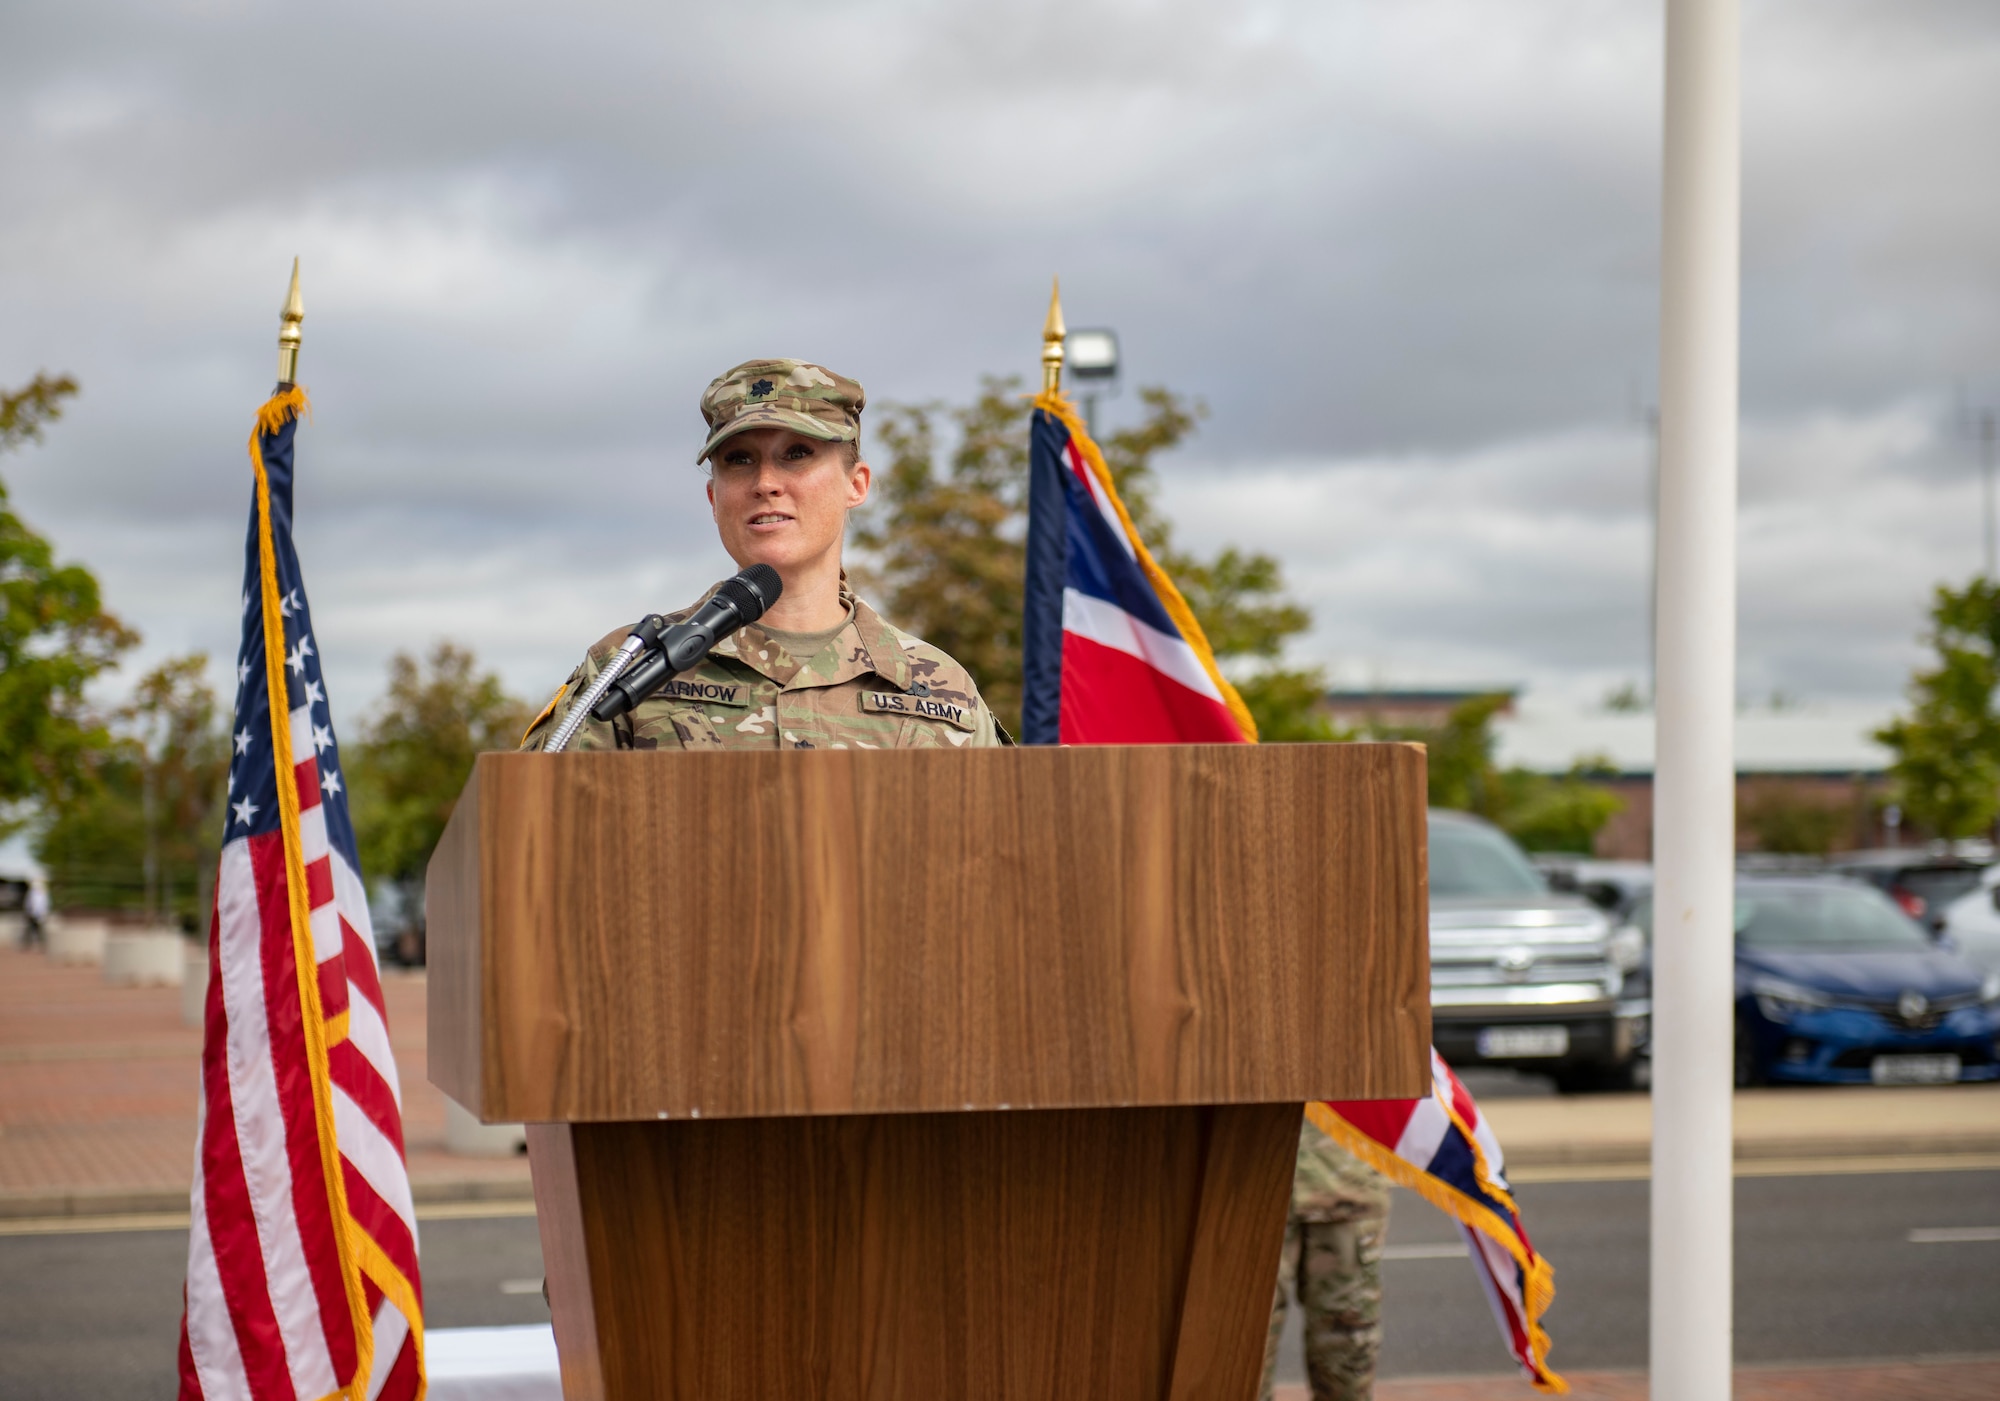 U.S. Army Lt. Col. T.J. Fearnow, Joint Intelligence Command (JICAF) U.S. Africa Command incoming commander, makes remarks following her assumption of command at RAF Molesworth, England, July 20, 2022. This was part of the ceremony for the deactivation of USAFRICOM J2 Molesworth, and the activation of the JICAF. (U.S. Air Force photo by Senior Airman Jason W. Cochran)